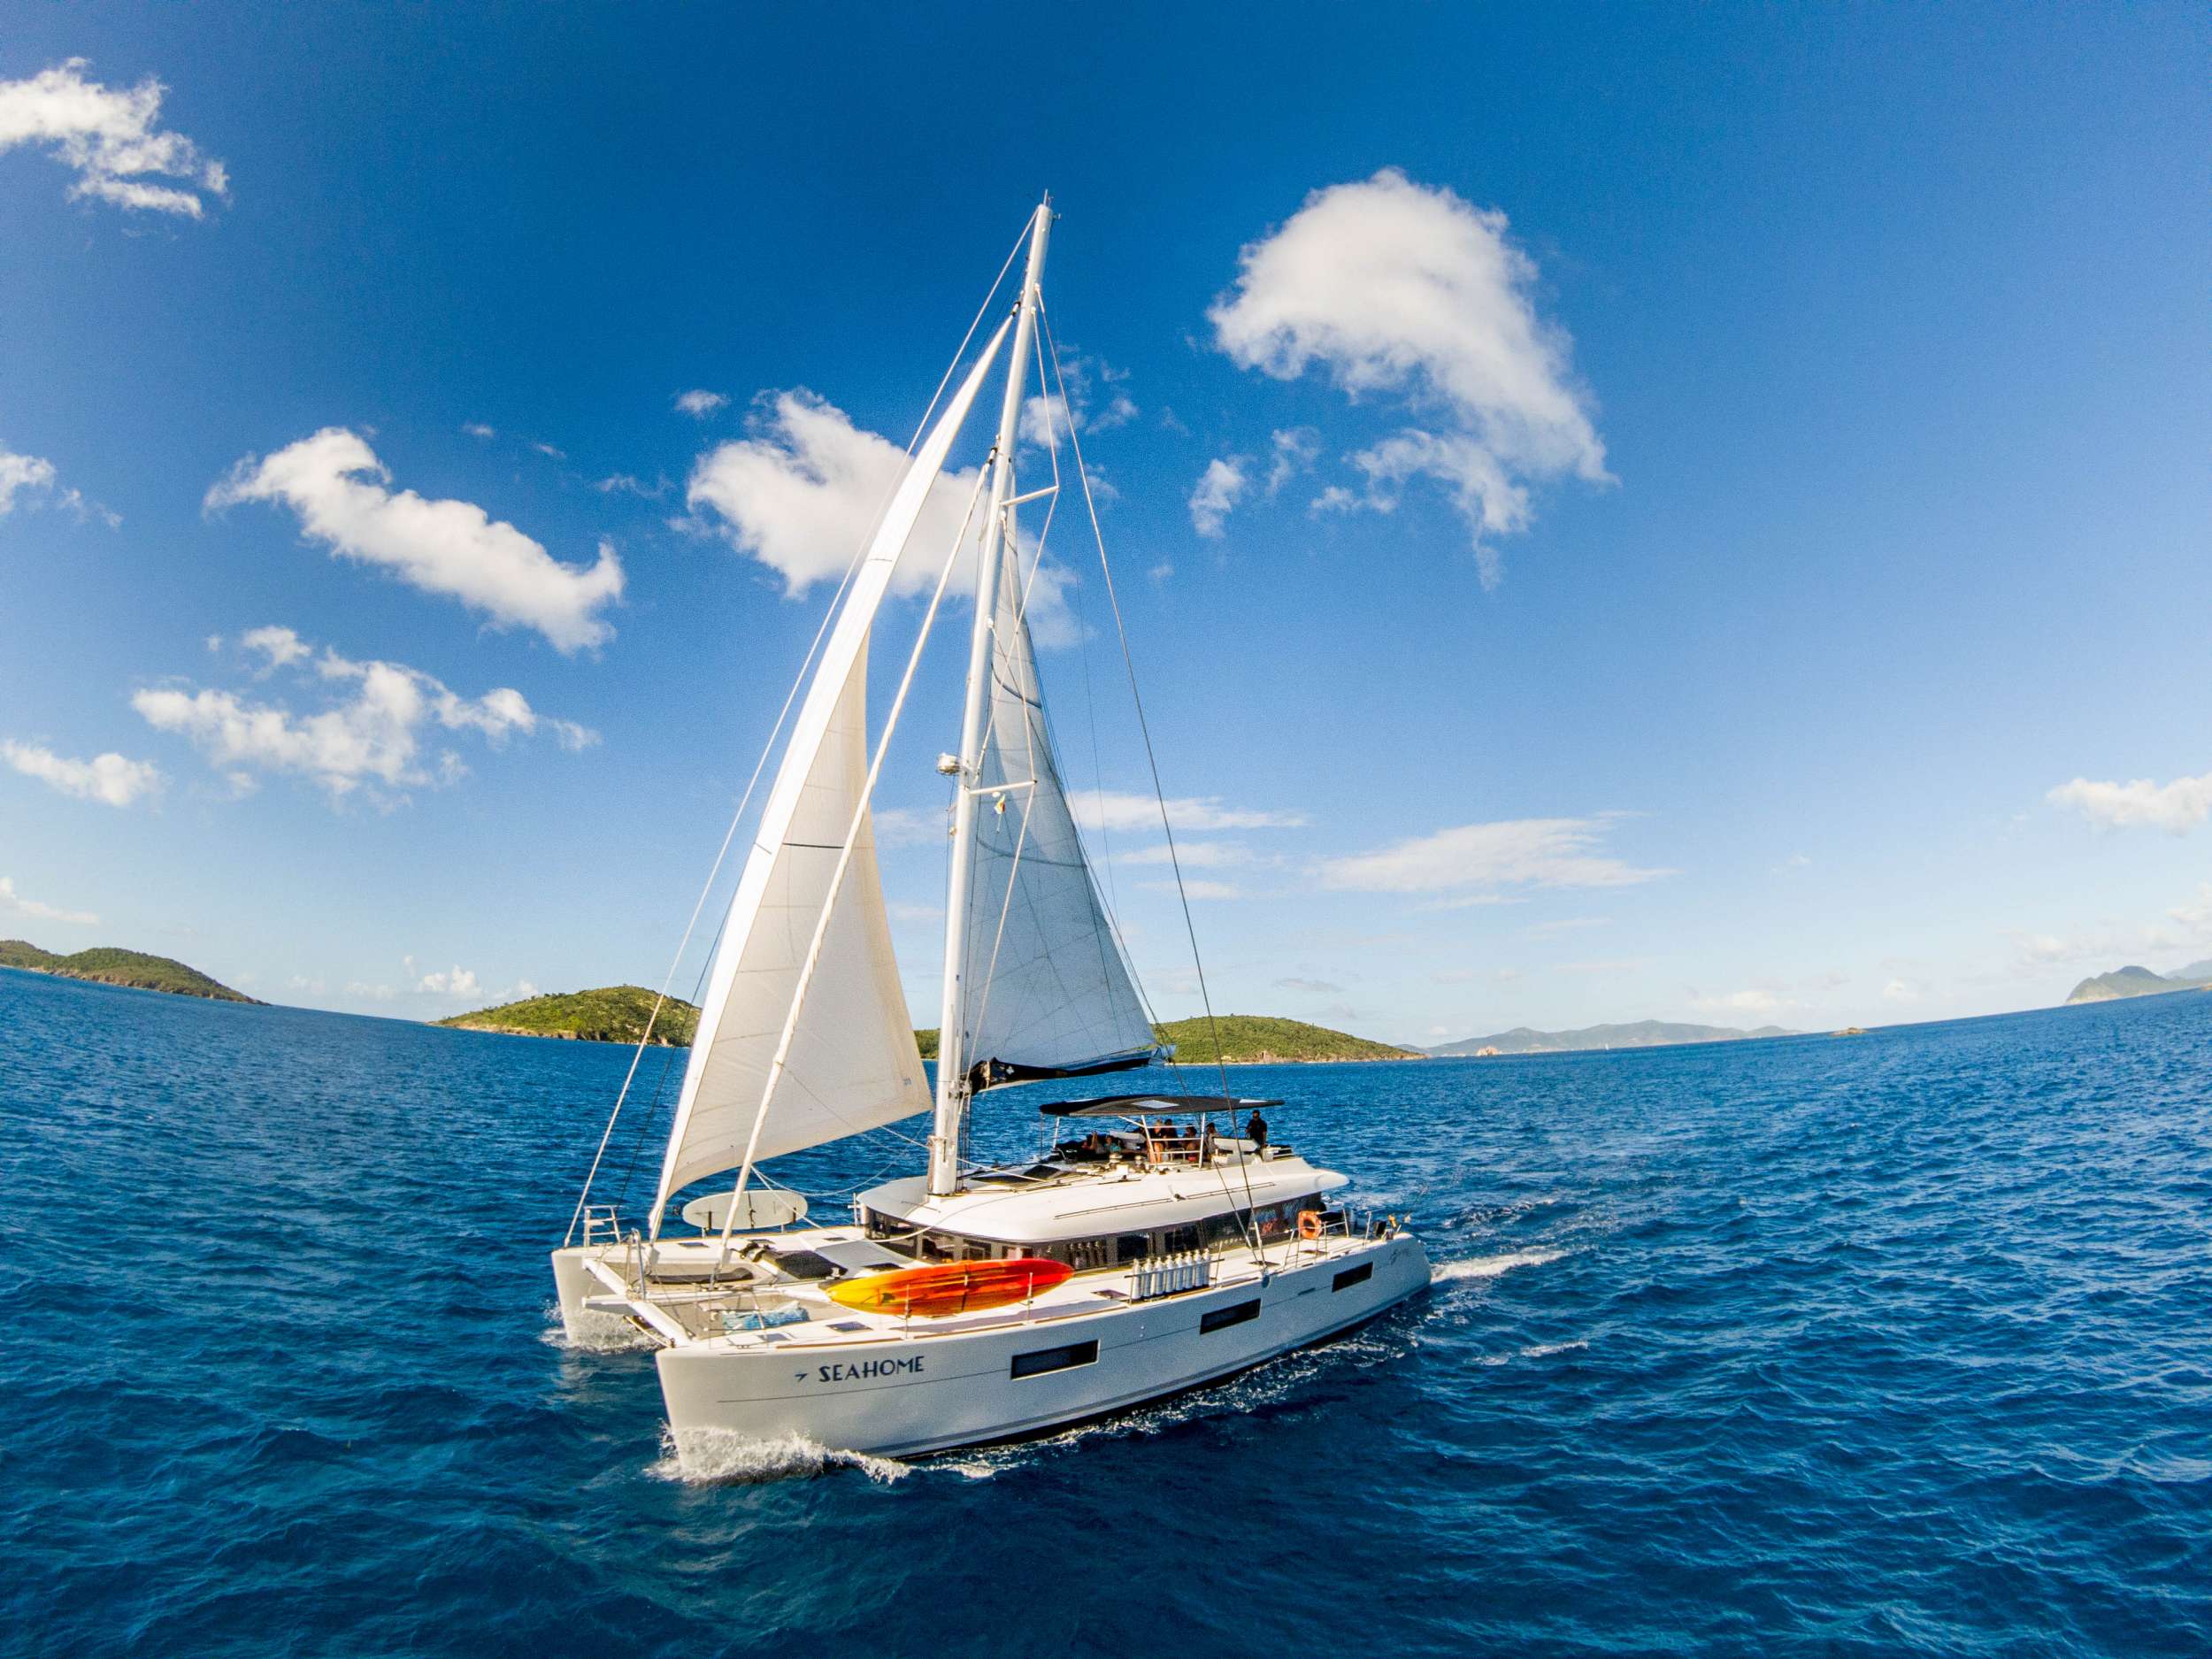 seahome - Yacht Charter Netherlands Antilles & Boat hire in Caribbean 1